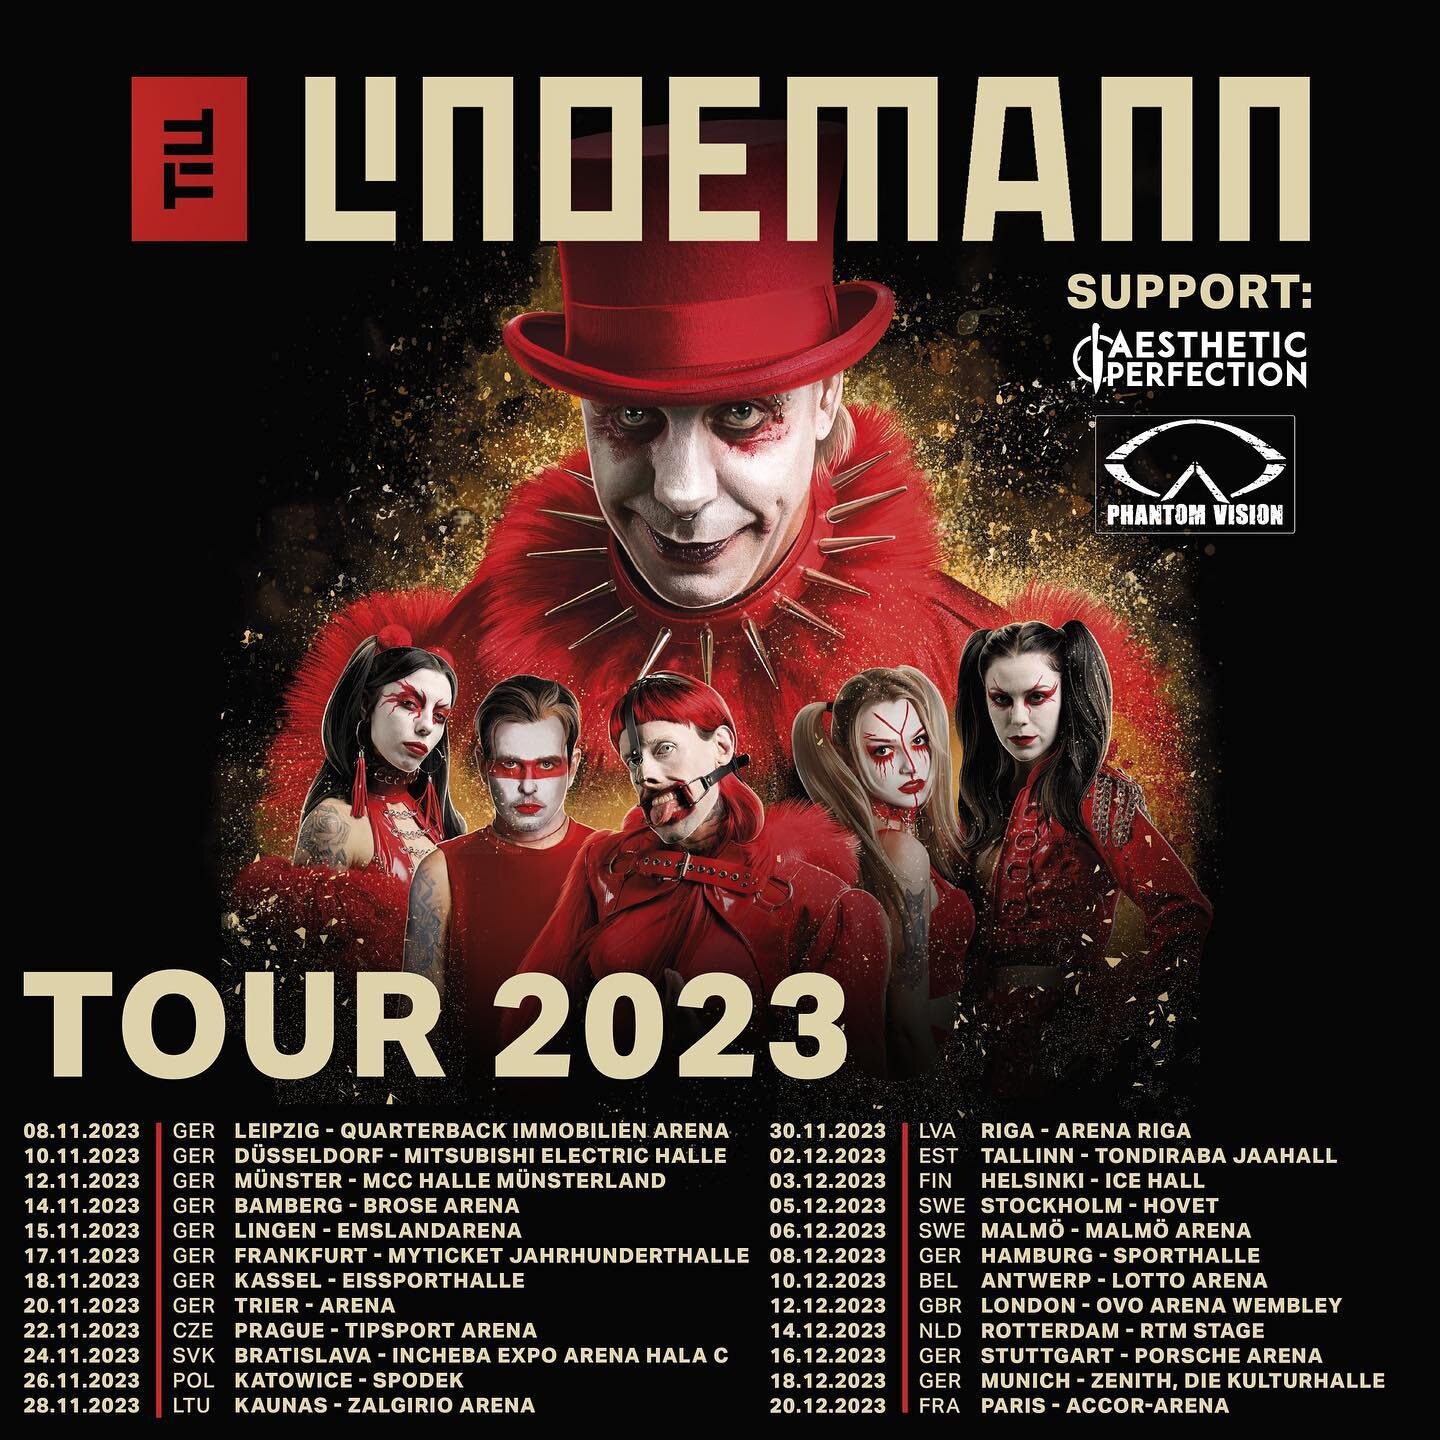 We are beyond excited to announce we will once again be direct support for @till_lindemann_official on his upcoming European tour. 24 shows in 13 countries. This is going to be massive! 

Tickets on sale May 2nd at 12 noon via Till&rsquo;s official w